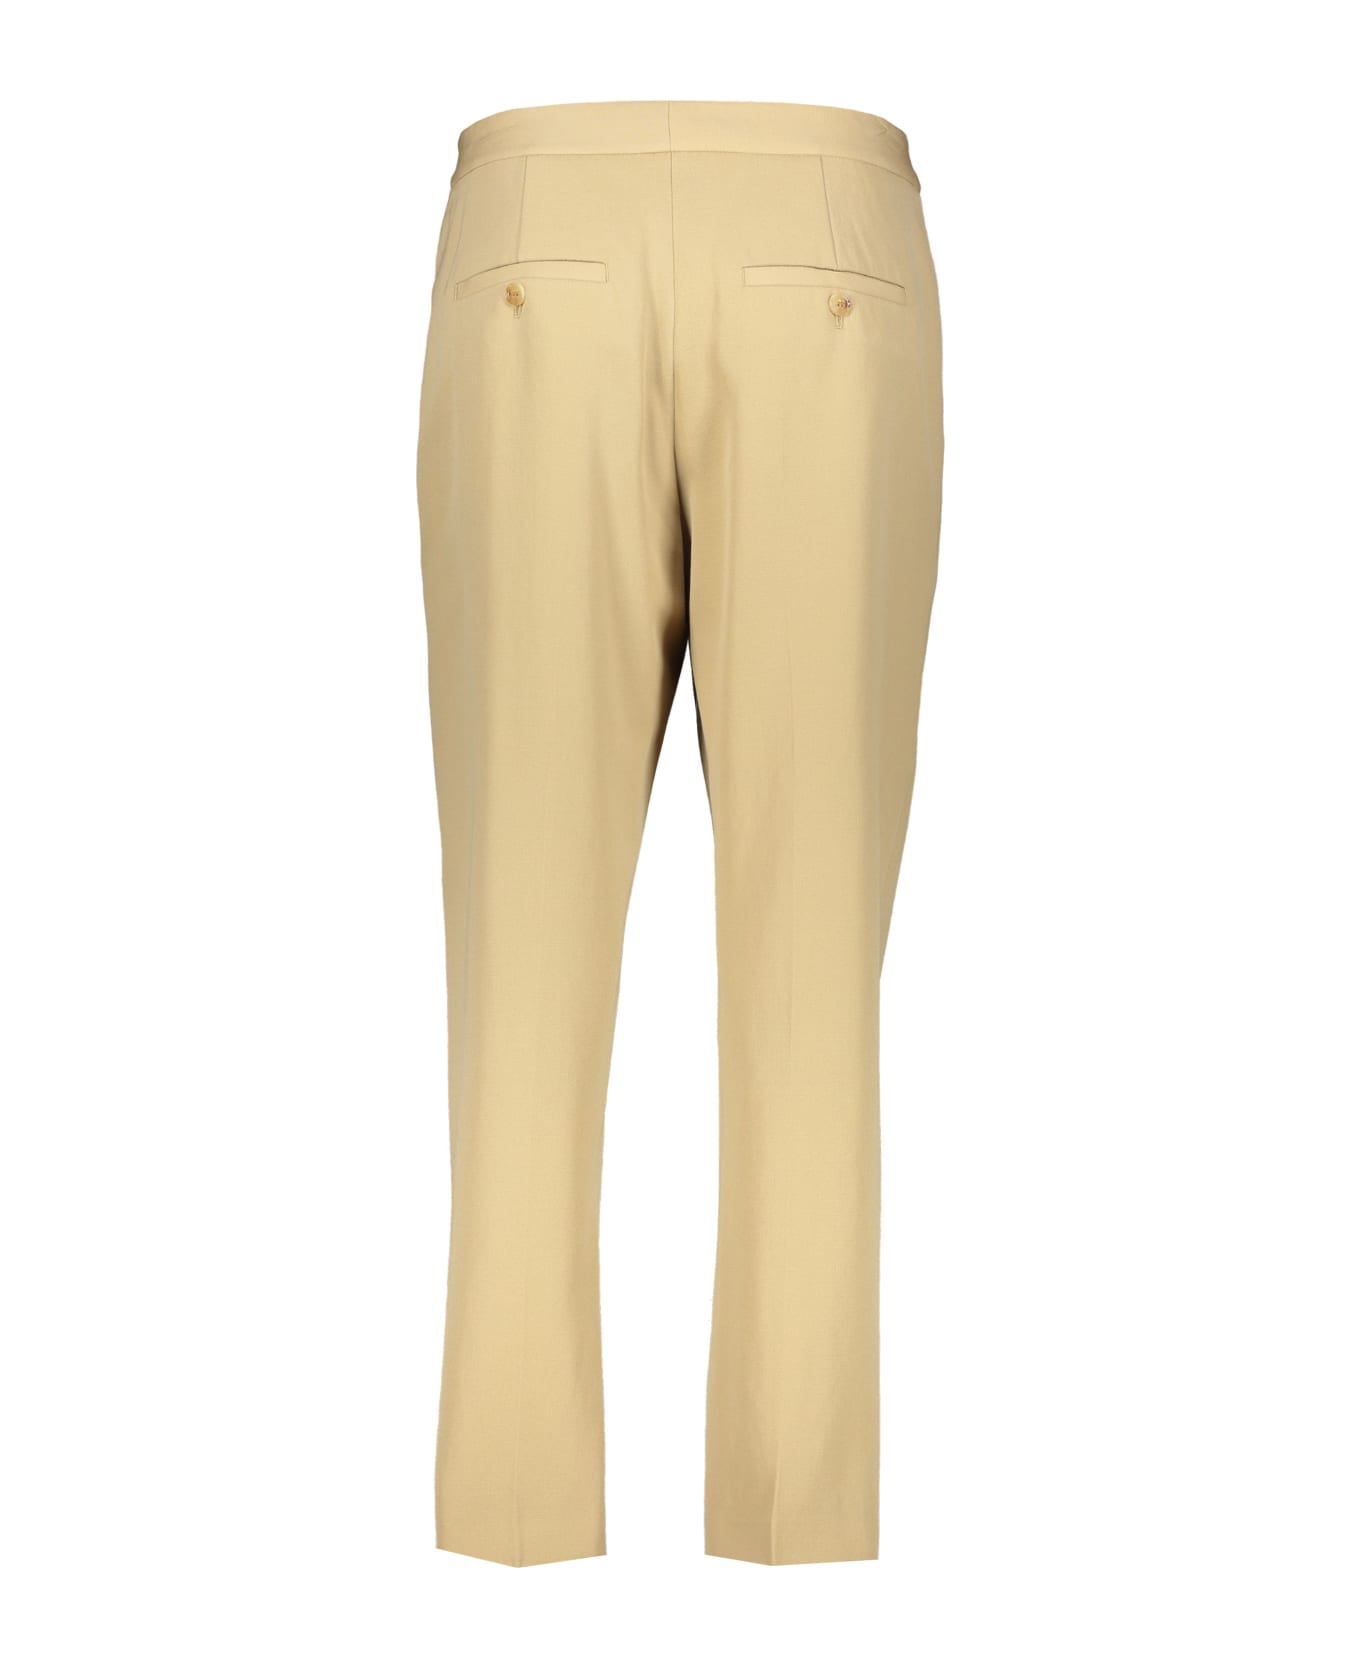 Burberry Wool Trousers - Beige ボトムス